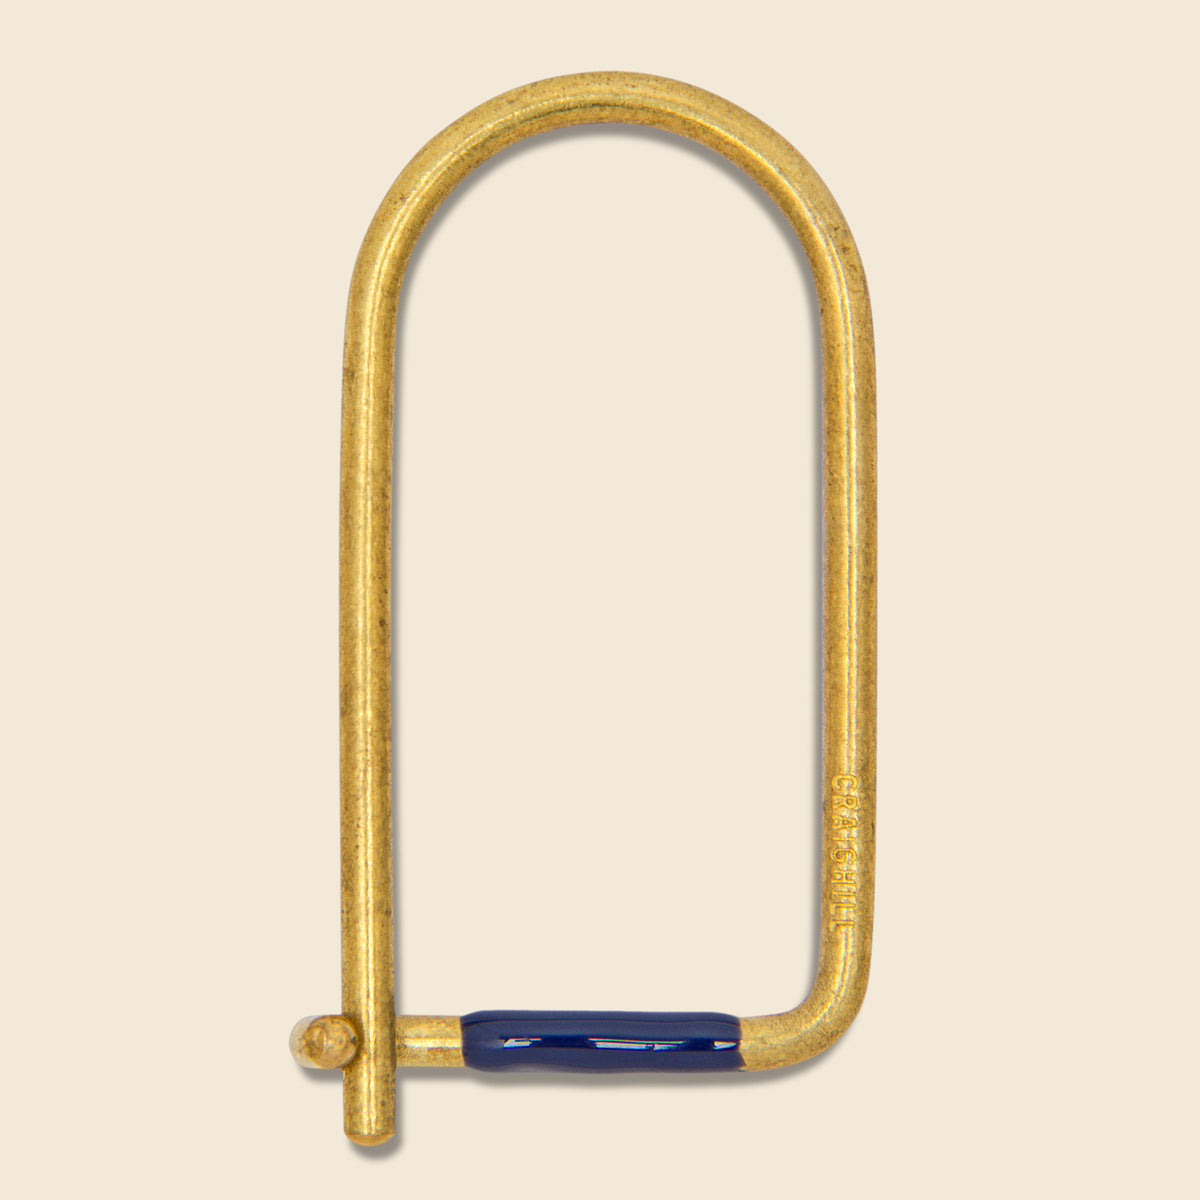 Town & Country Brass Key Rings